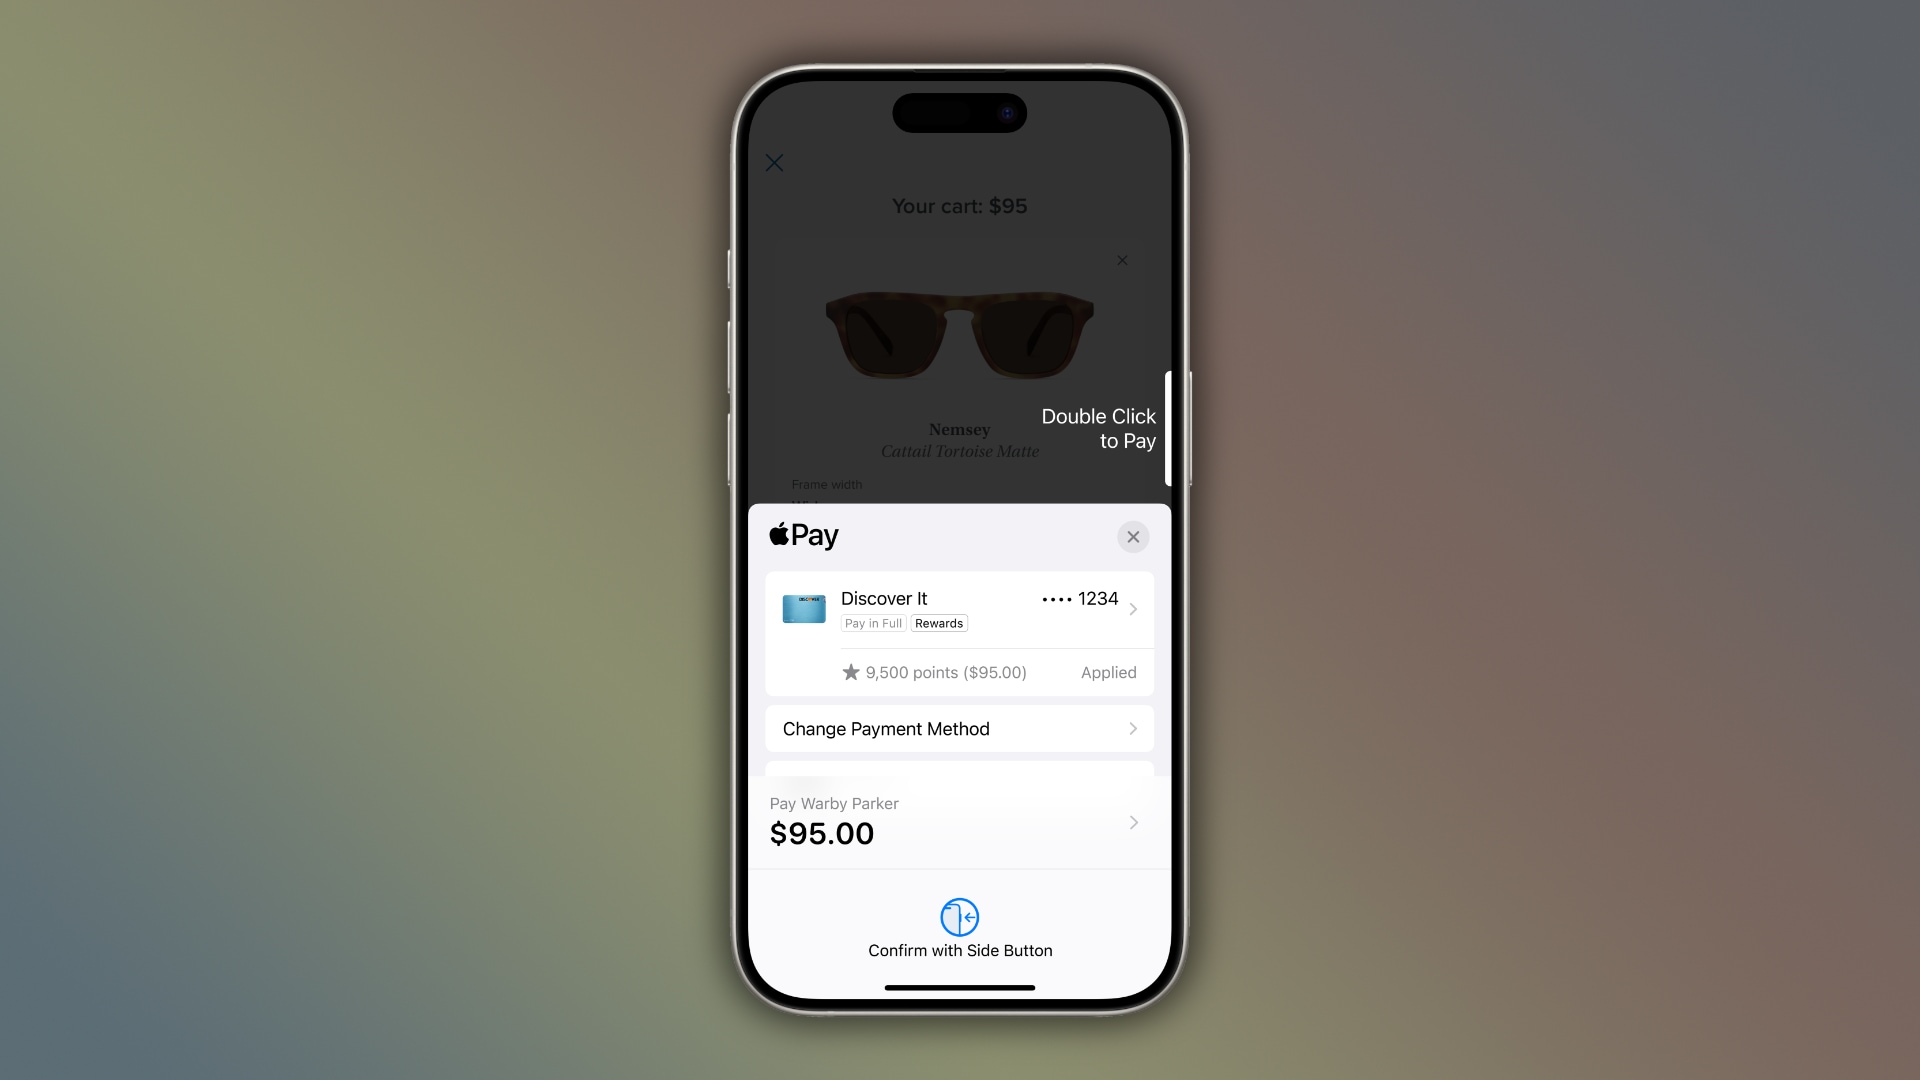 iPhone showcasing using installment loans with Apple Pay checkout, set against a colorful gradient background